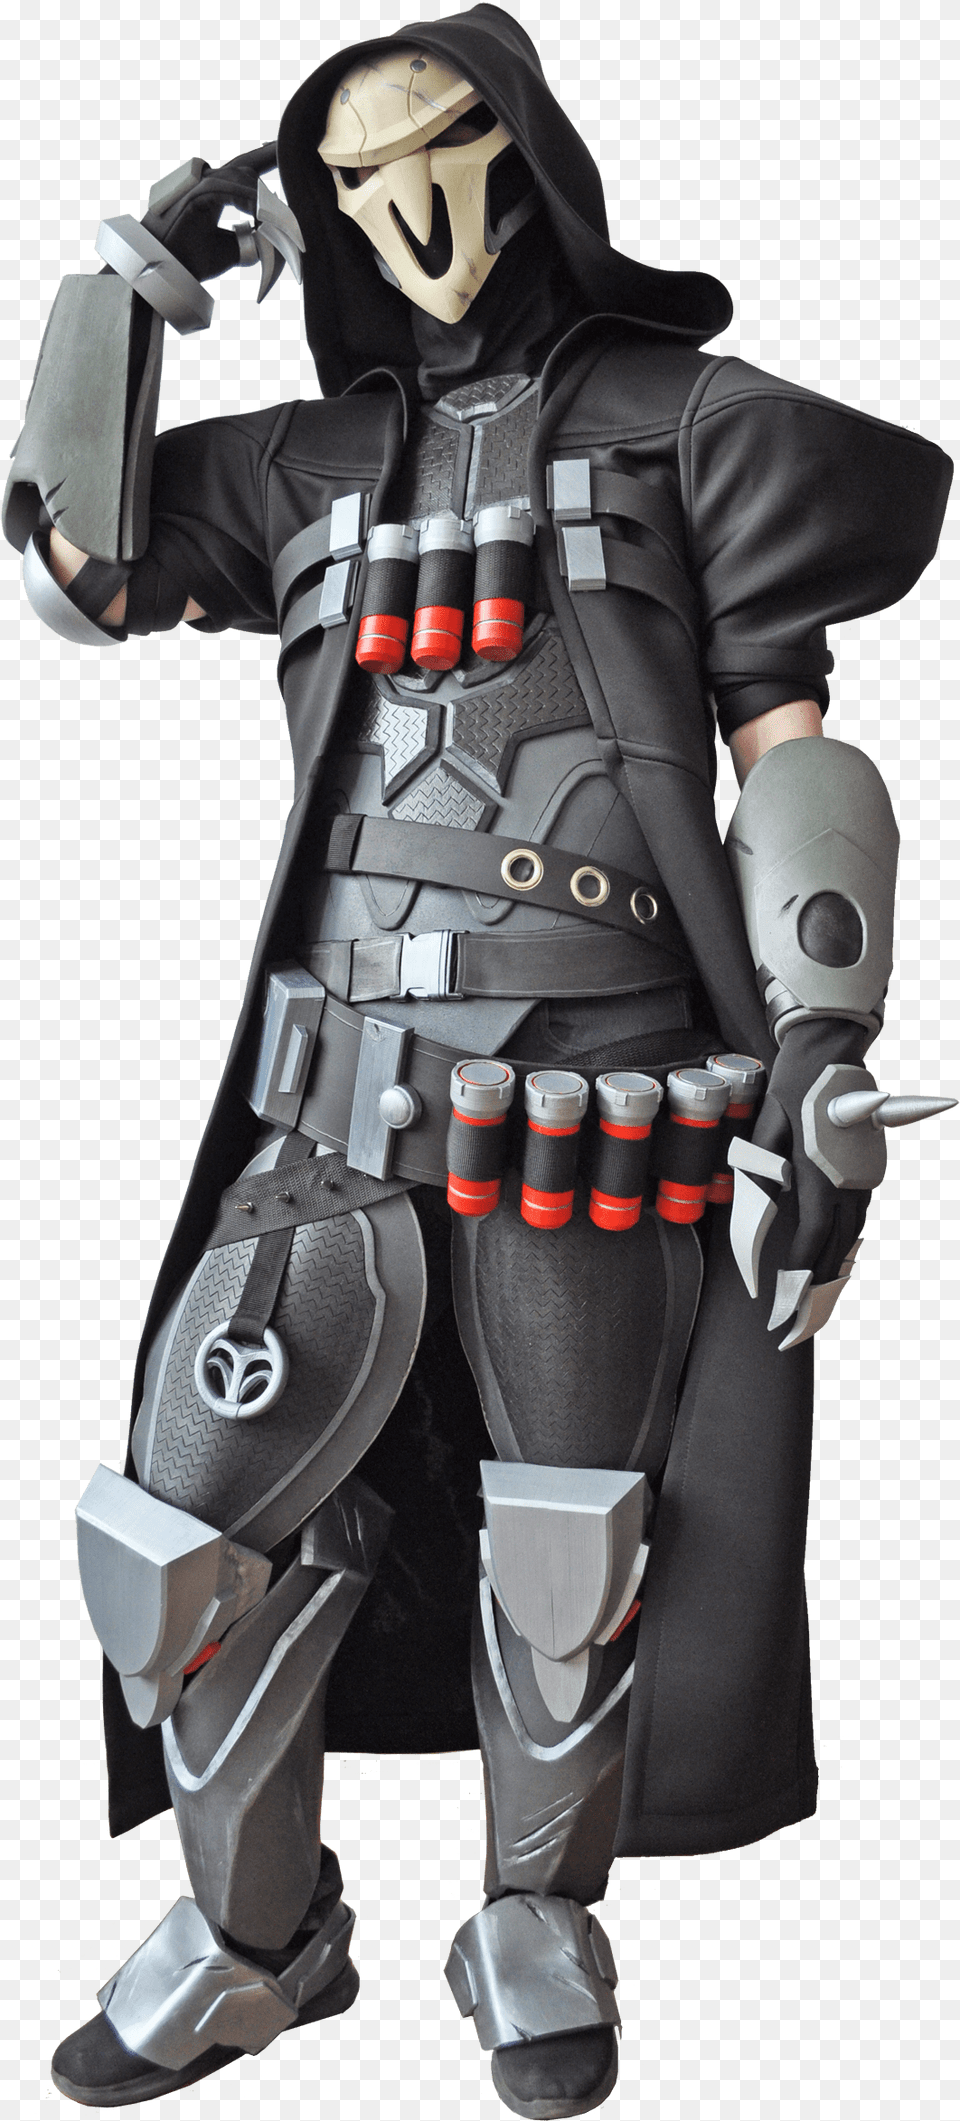 Overwatch Cosplay For Sale Cosplay Overwatch Faucheur, Clothing, Costume, Person, Adult Png